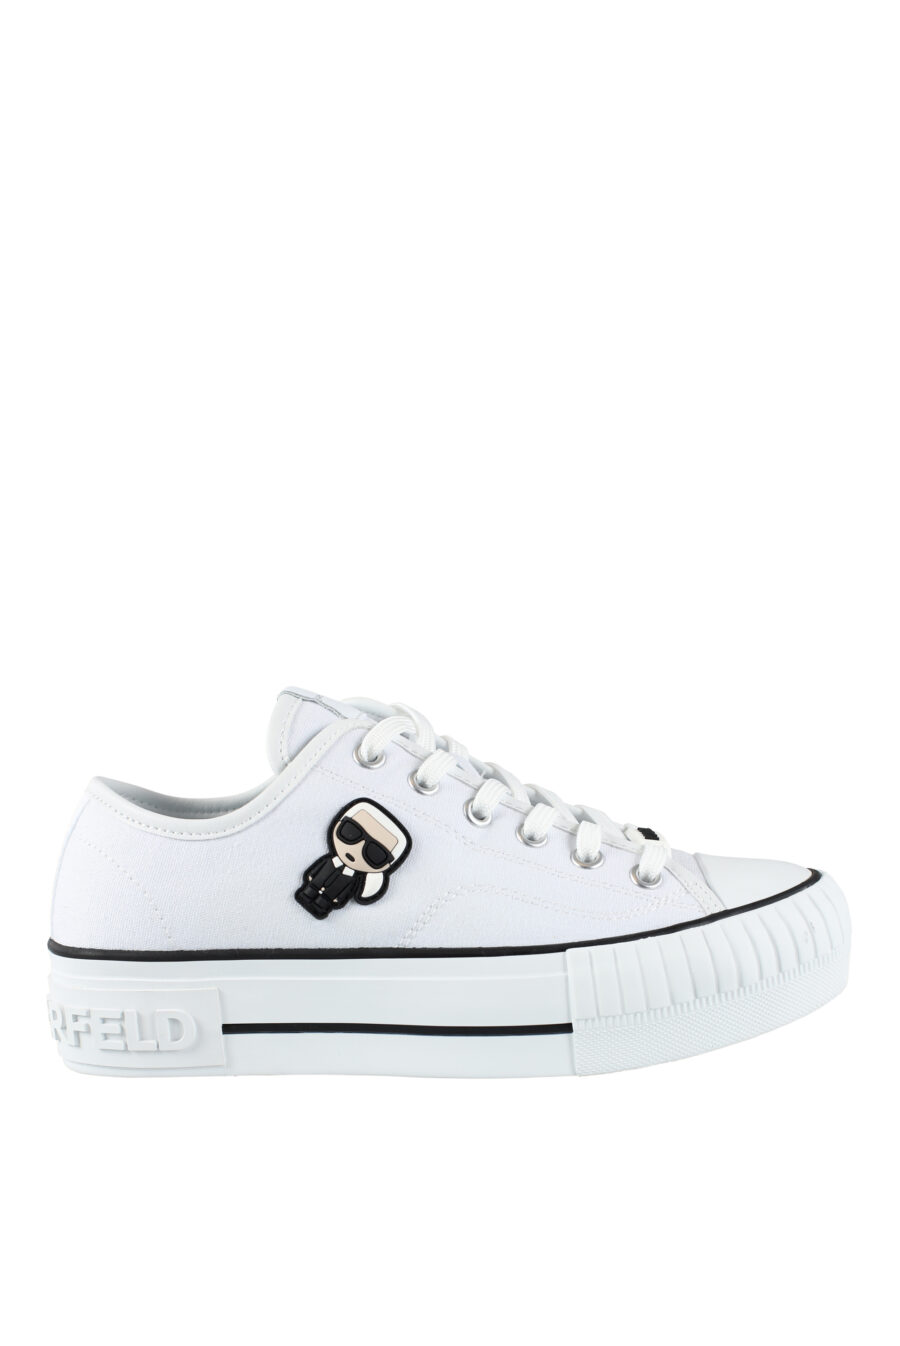 White converse style trainers with rubber "karl" logo - IMG 9560